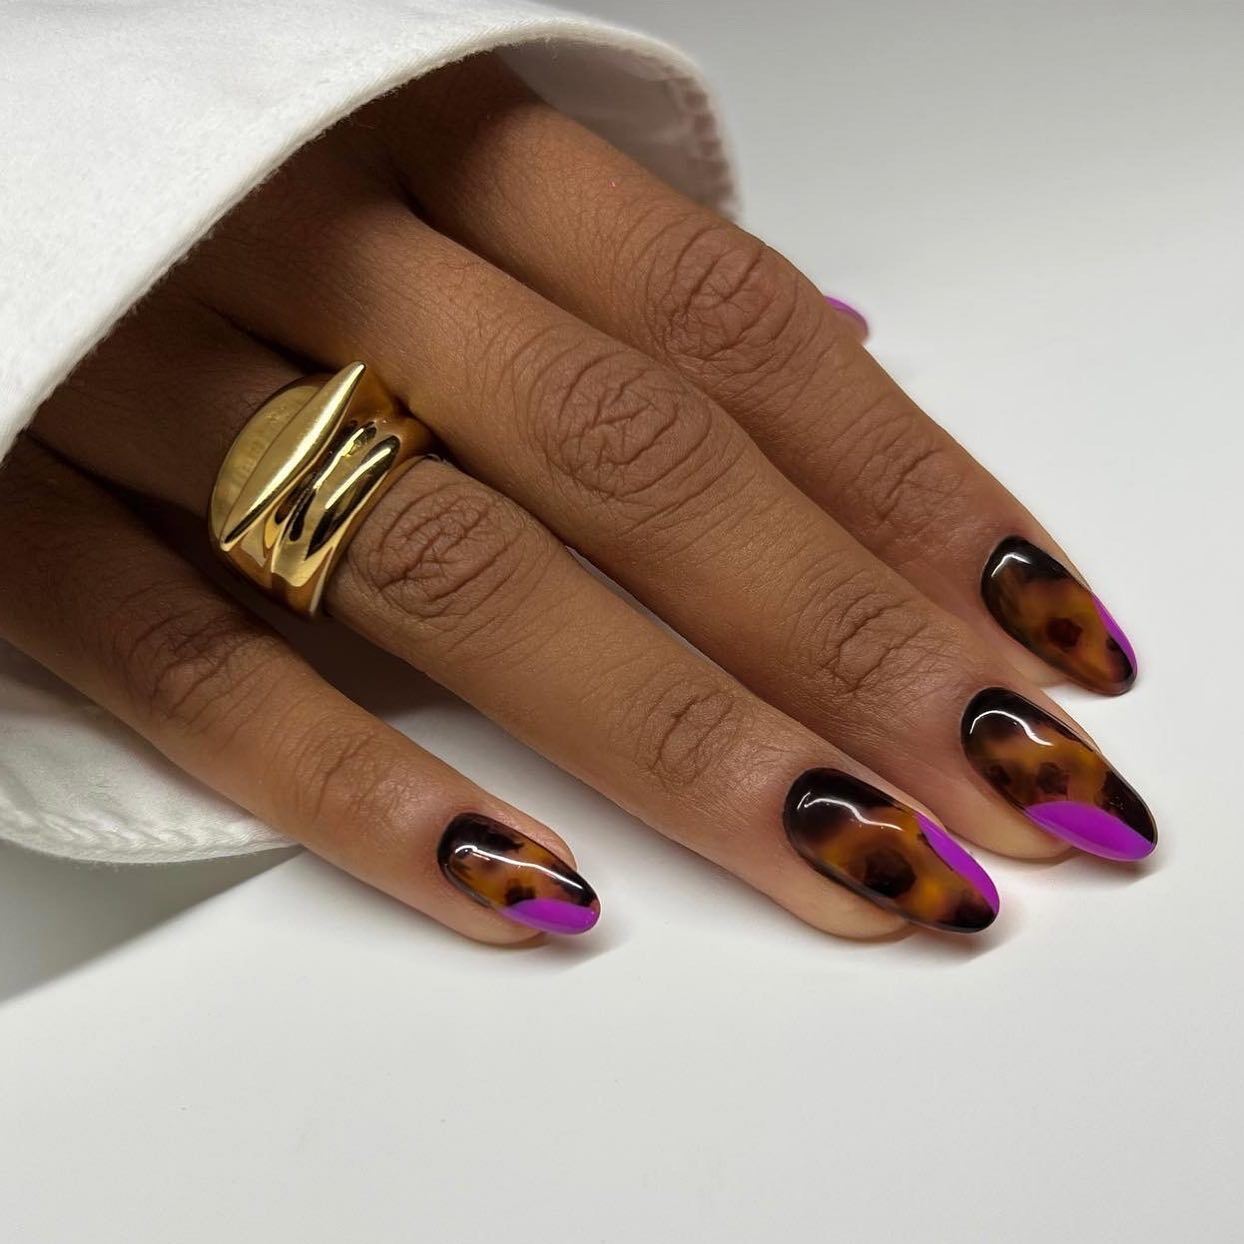 All shades of purple. 10+ trendy manicure options for this spring